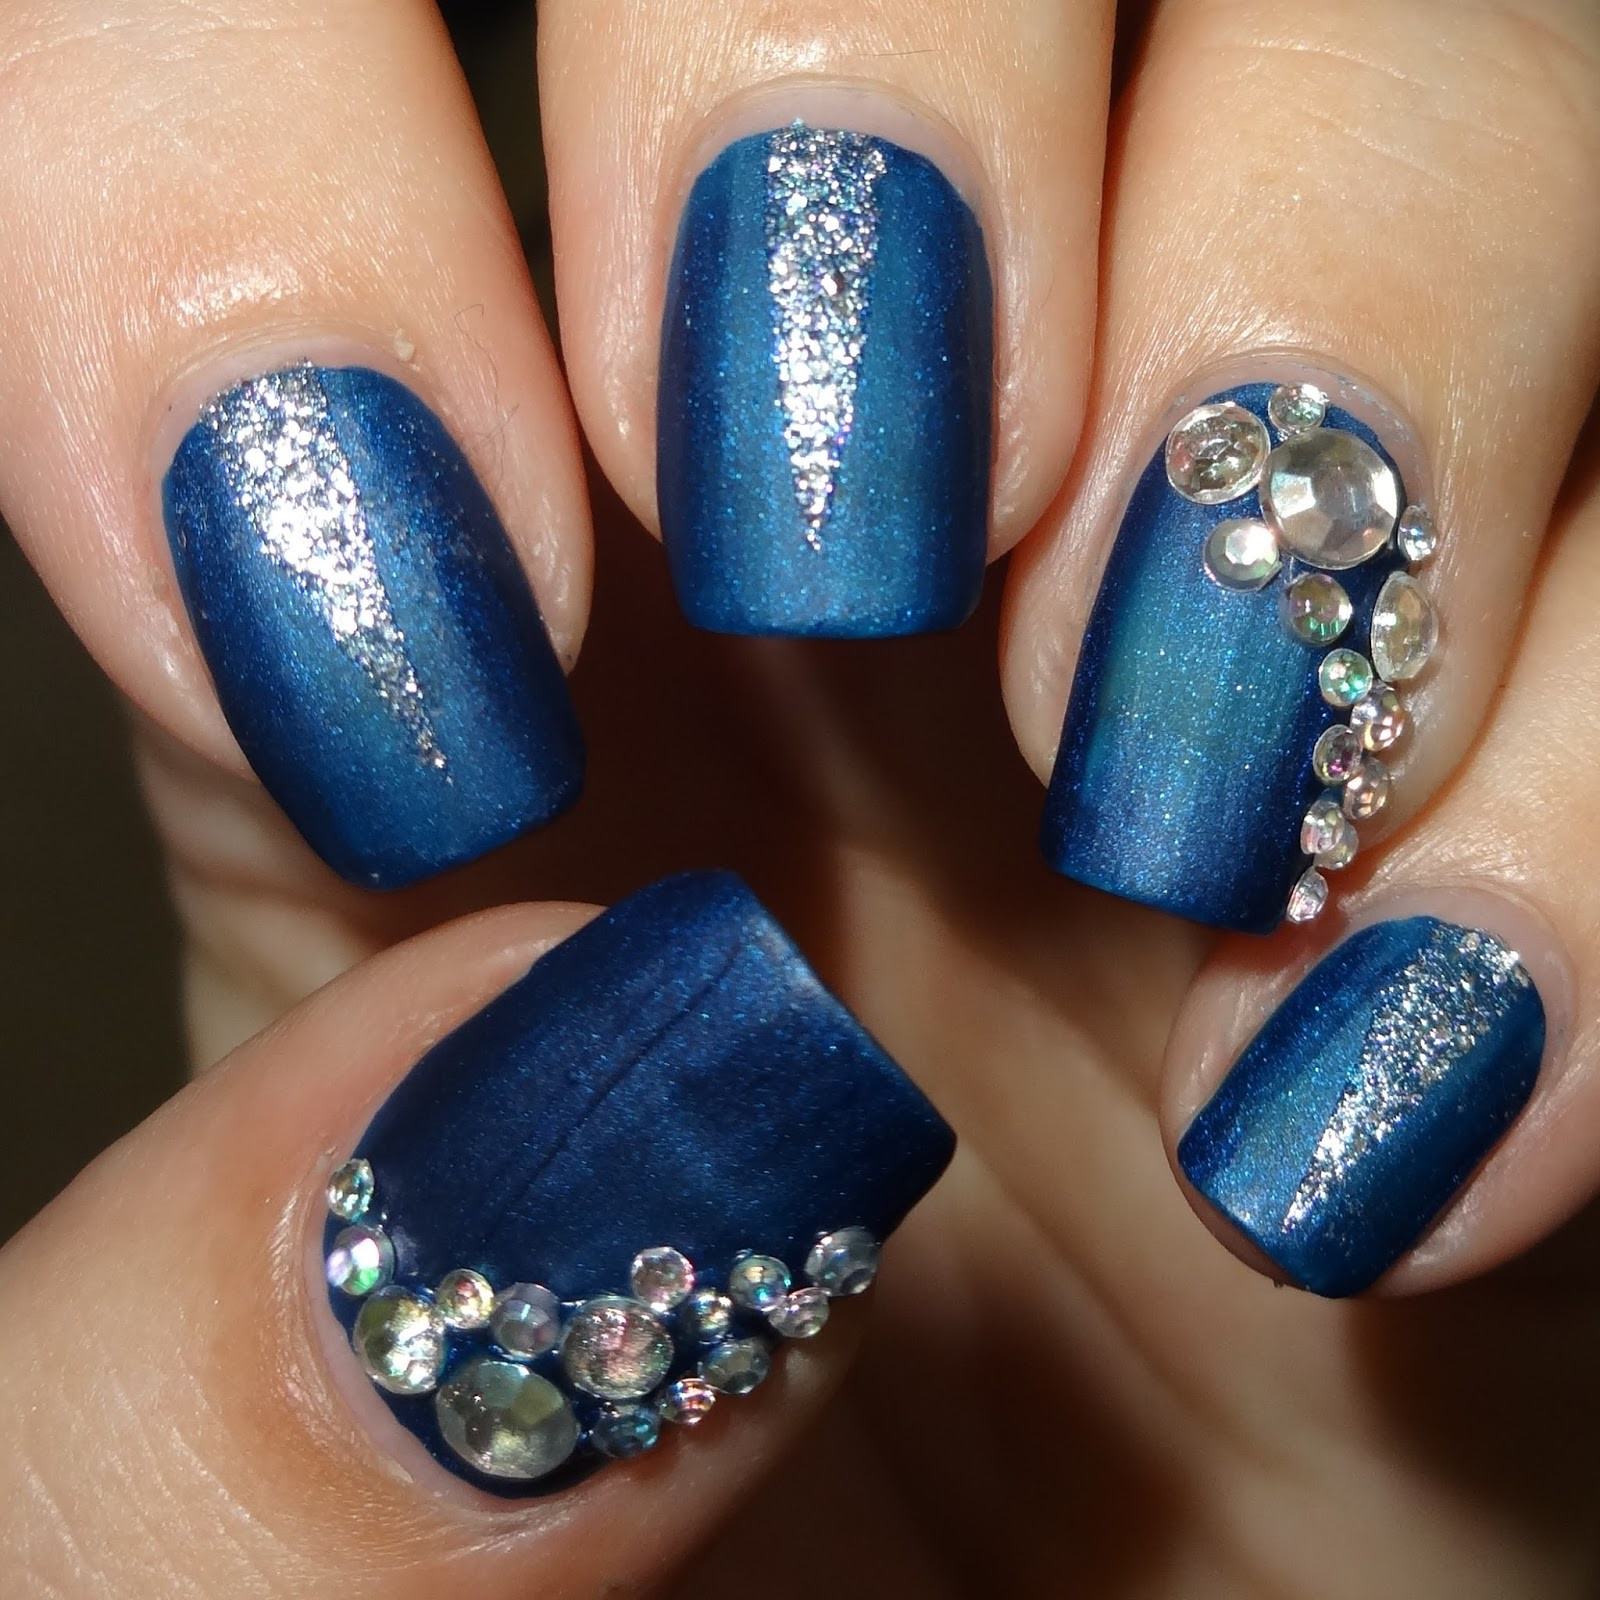 Jeweled Nail Designs
 Wendy s Delights Blue & Silver Mani using 3D Nail Art